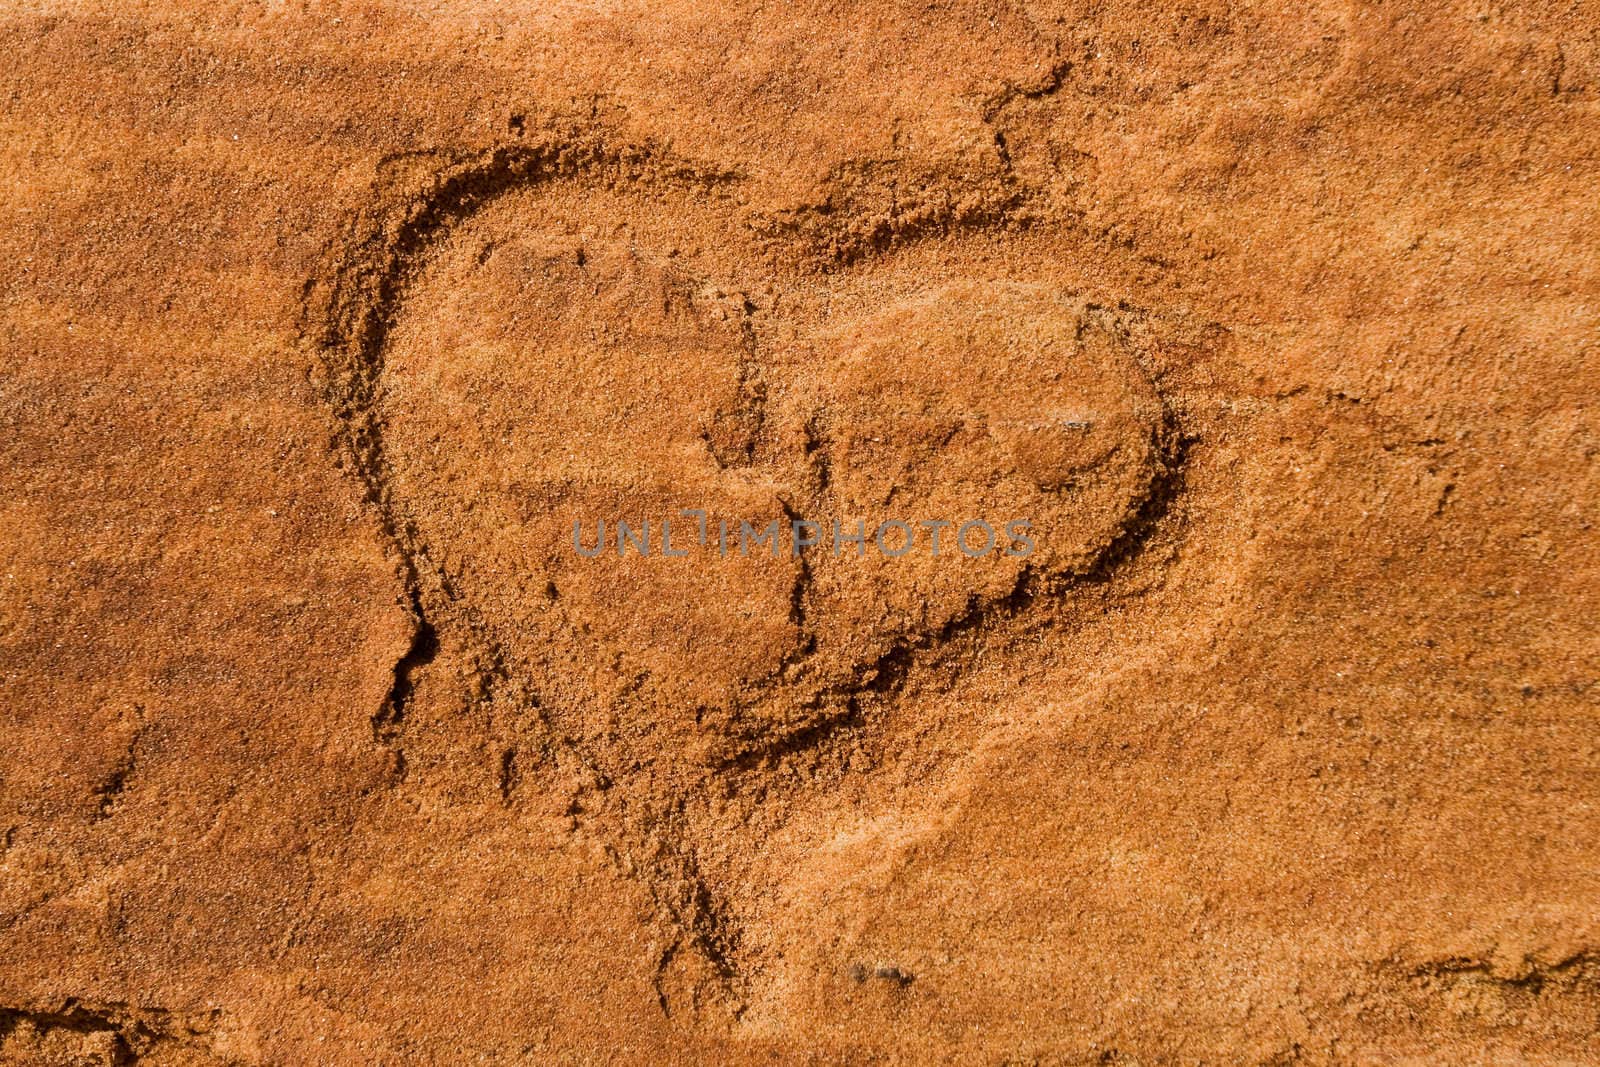 Heart scraped into sandstone by ints